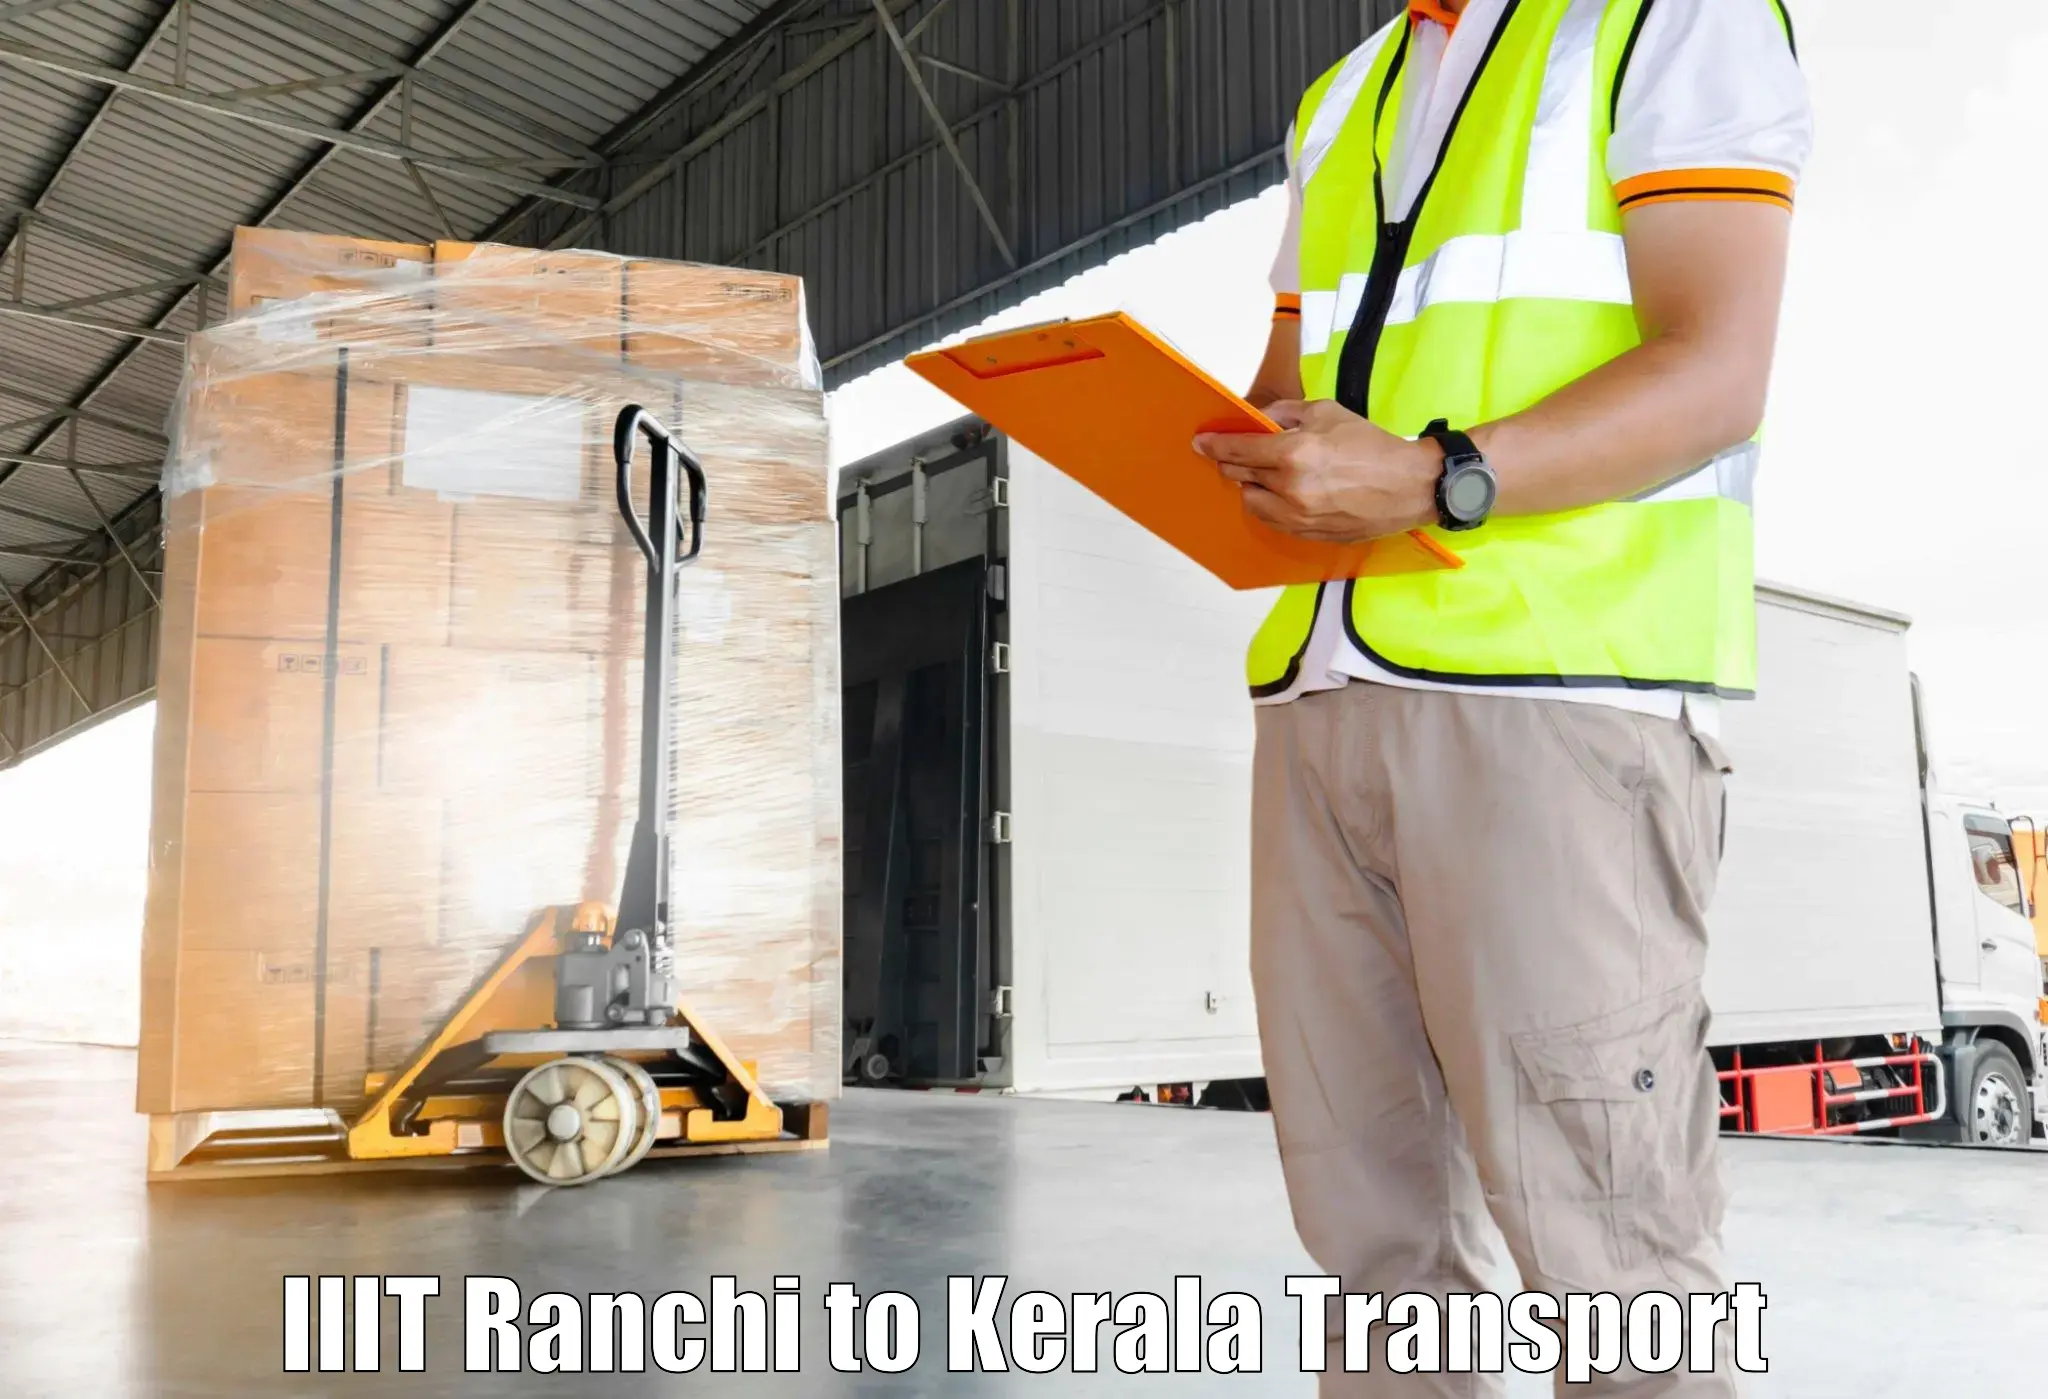 Delivery service IIIT Ranchi to Chungatra